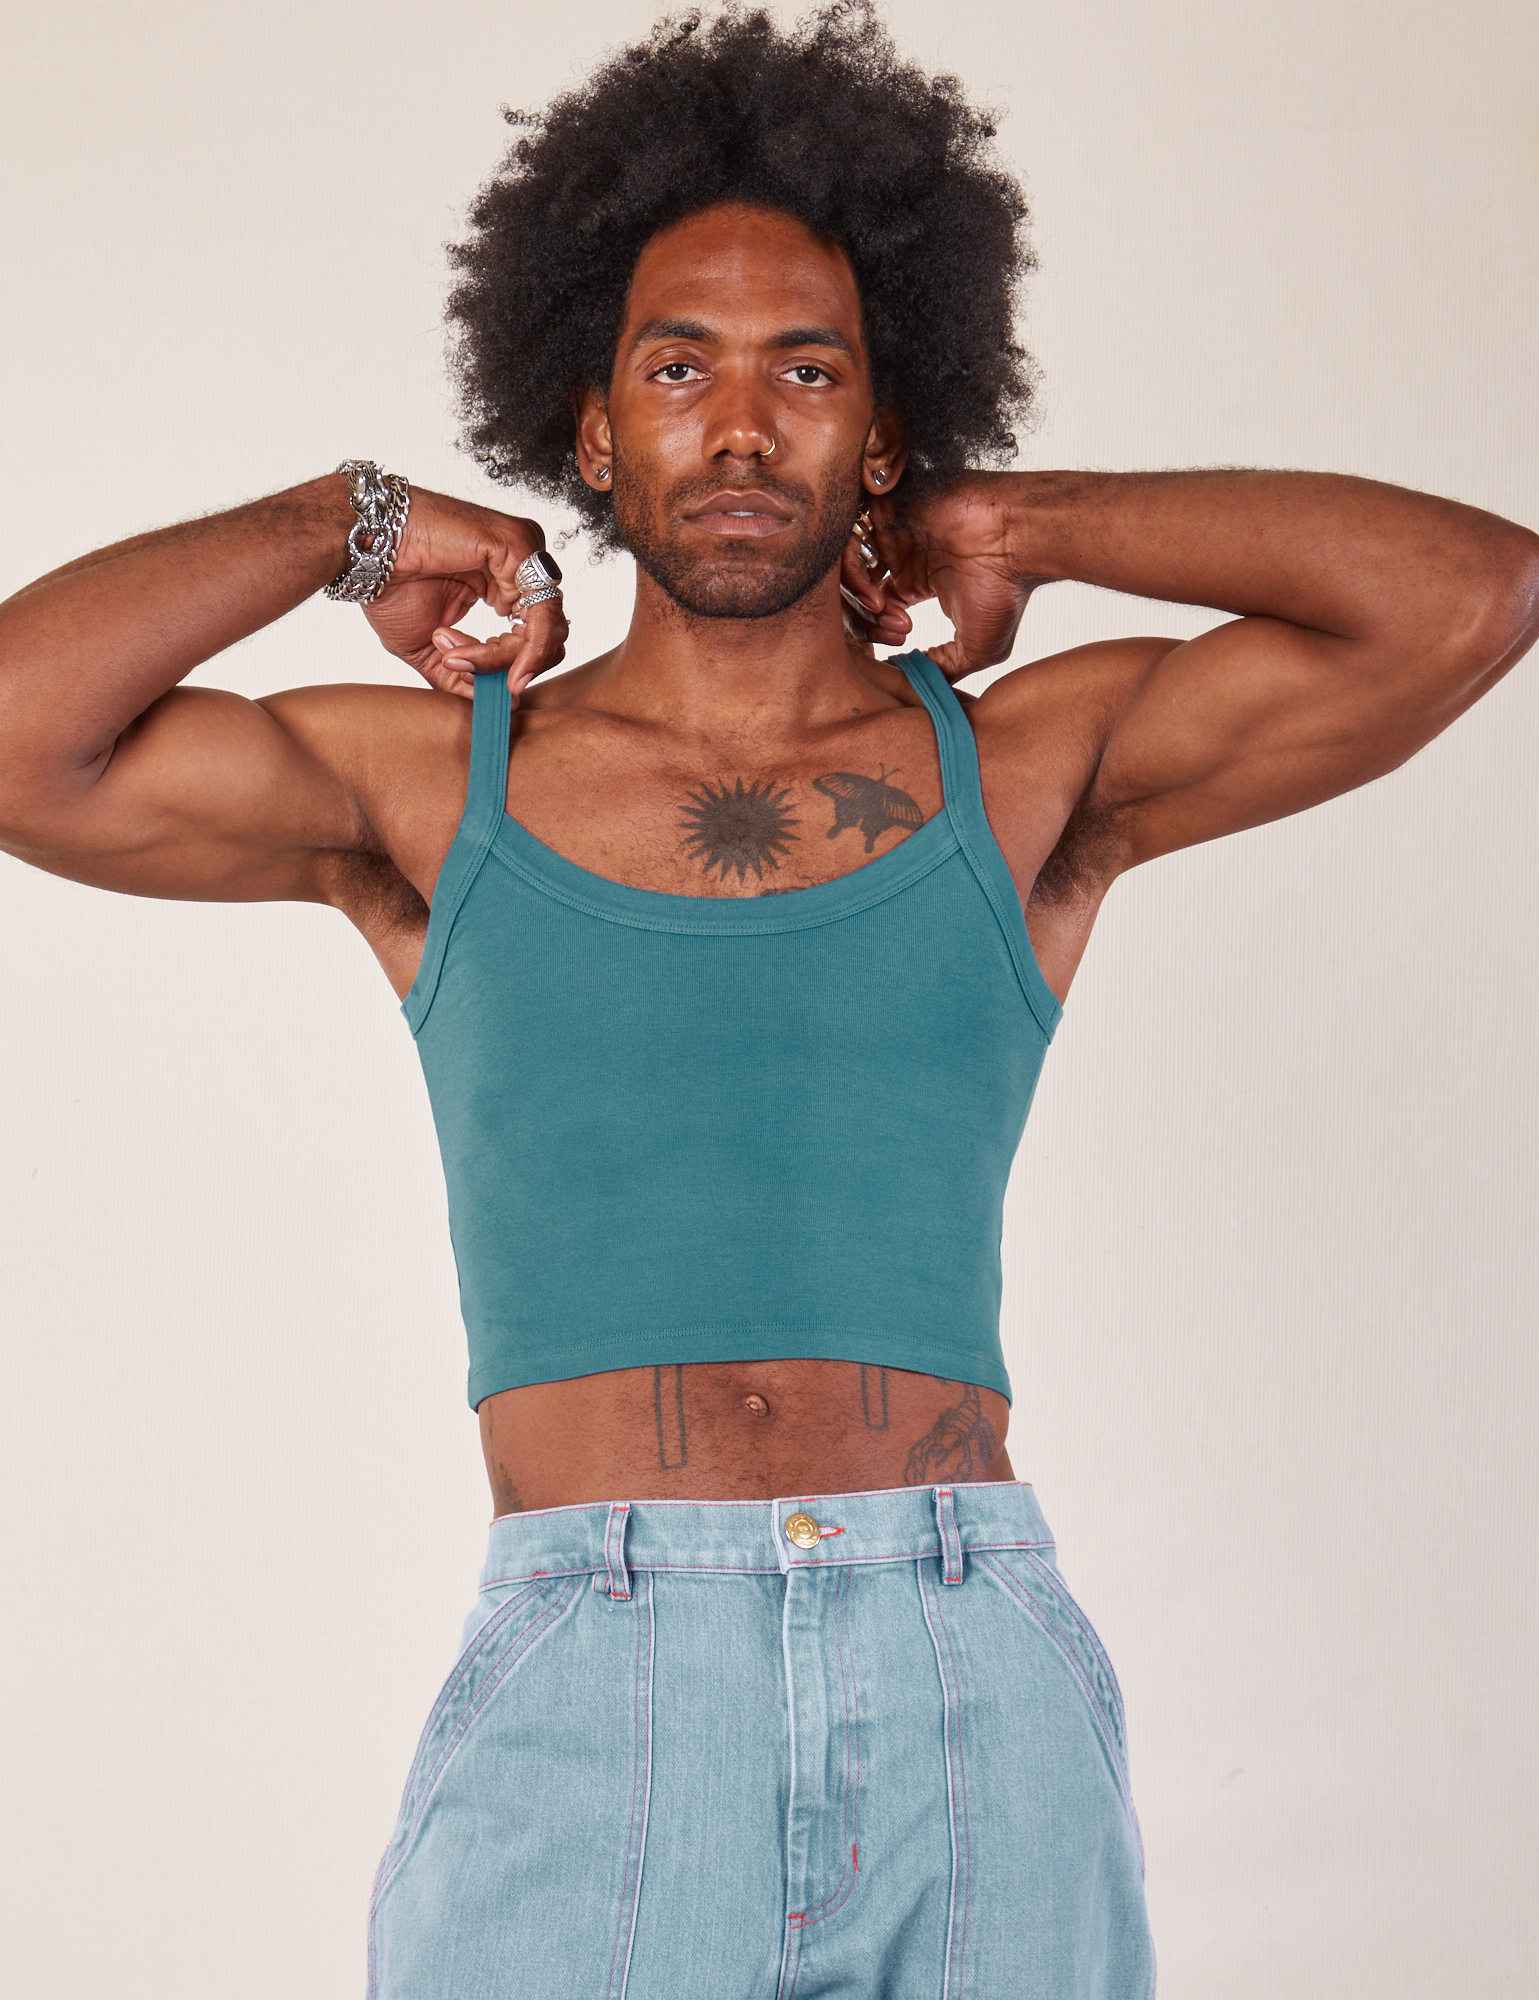 Jerrod is 6’3” and wearing S Cropped Cami in Marine Blue